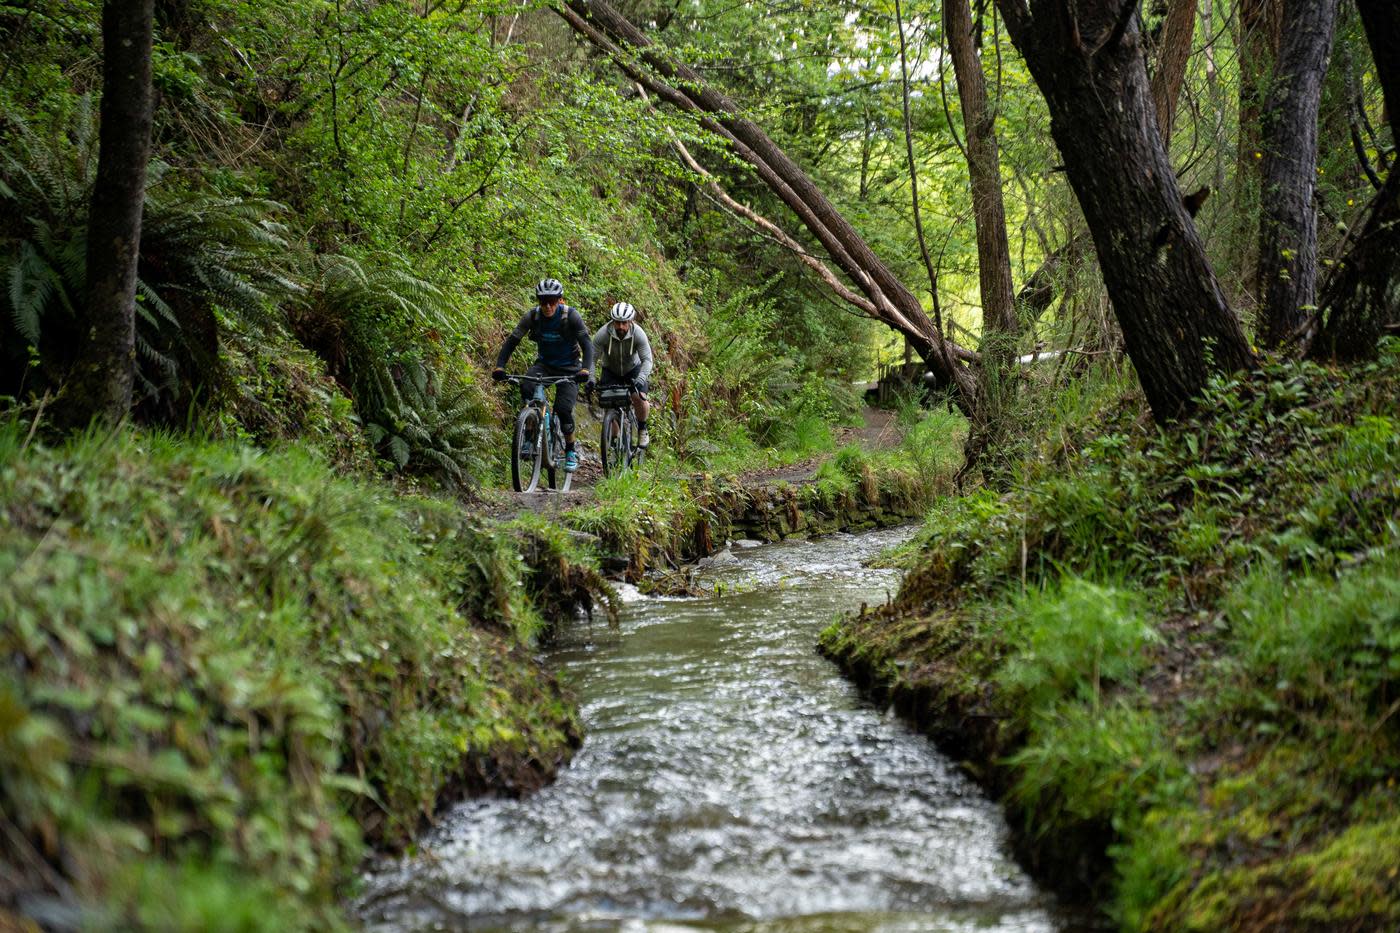 Bikers riding along river surrounded by green moss forest